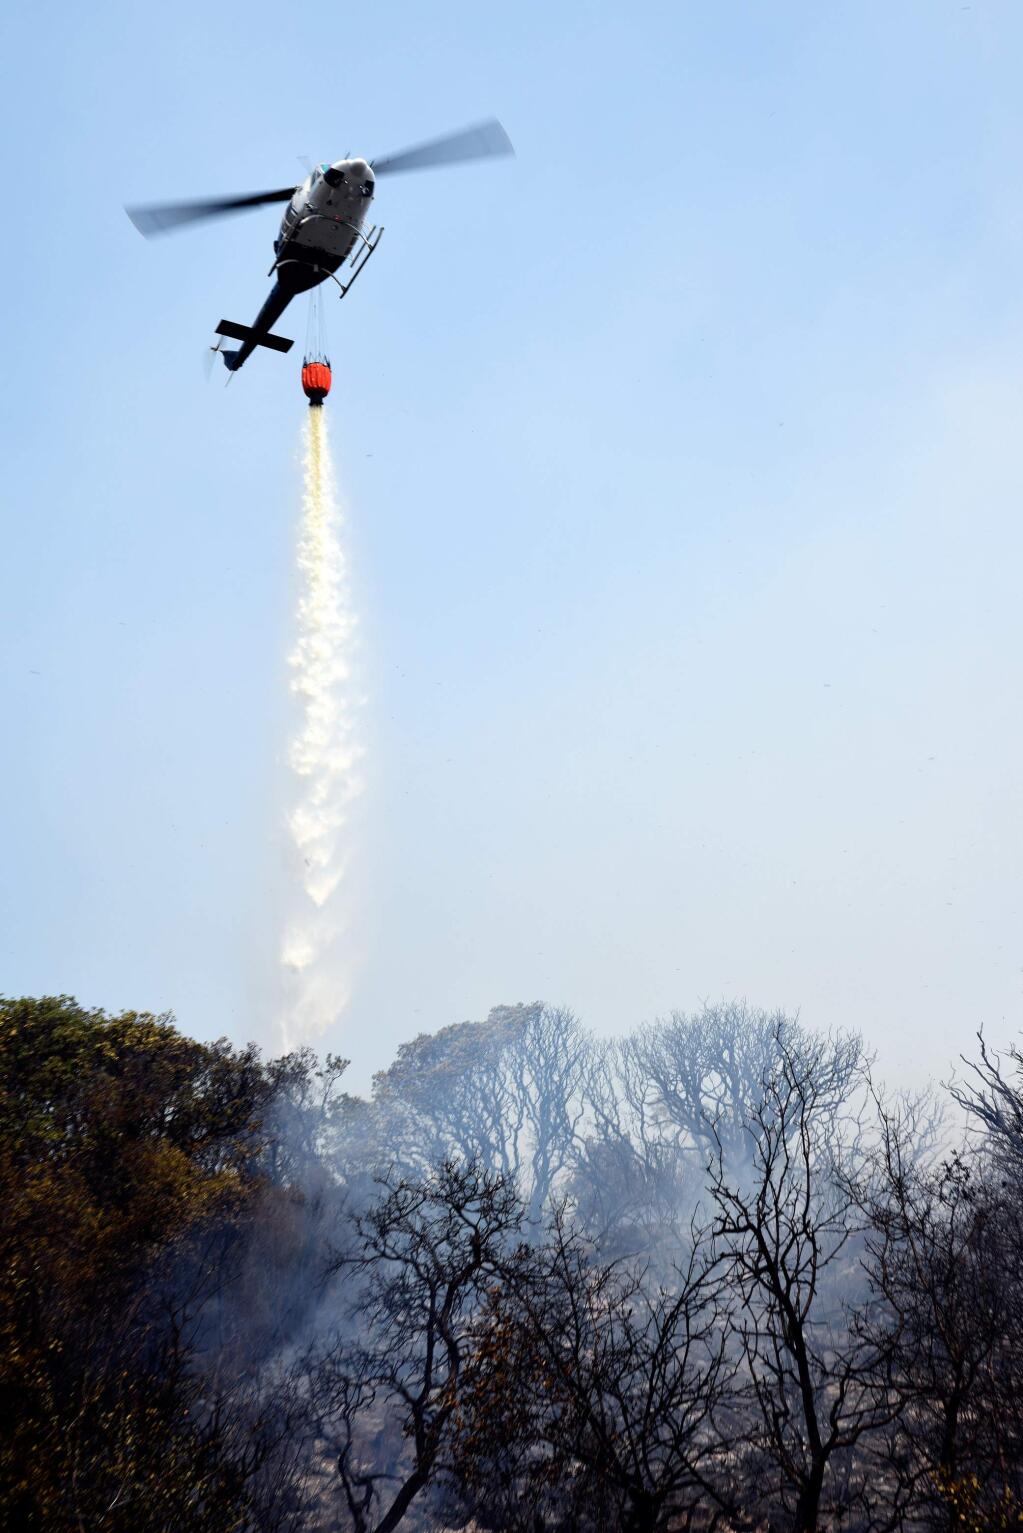 A firefighting helicopter drops water on a burning area along Morgan Valley Road during the fourth day battling the Rocky Fire near Clearlake Oaks, California on Saturday, August 1, 2015. The Rocky Fire to date has burned approximately 22,500 acres and is only 5% contained. (Alvin Jornada / The Press Democrat)